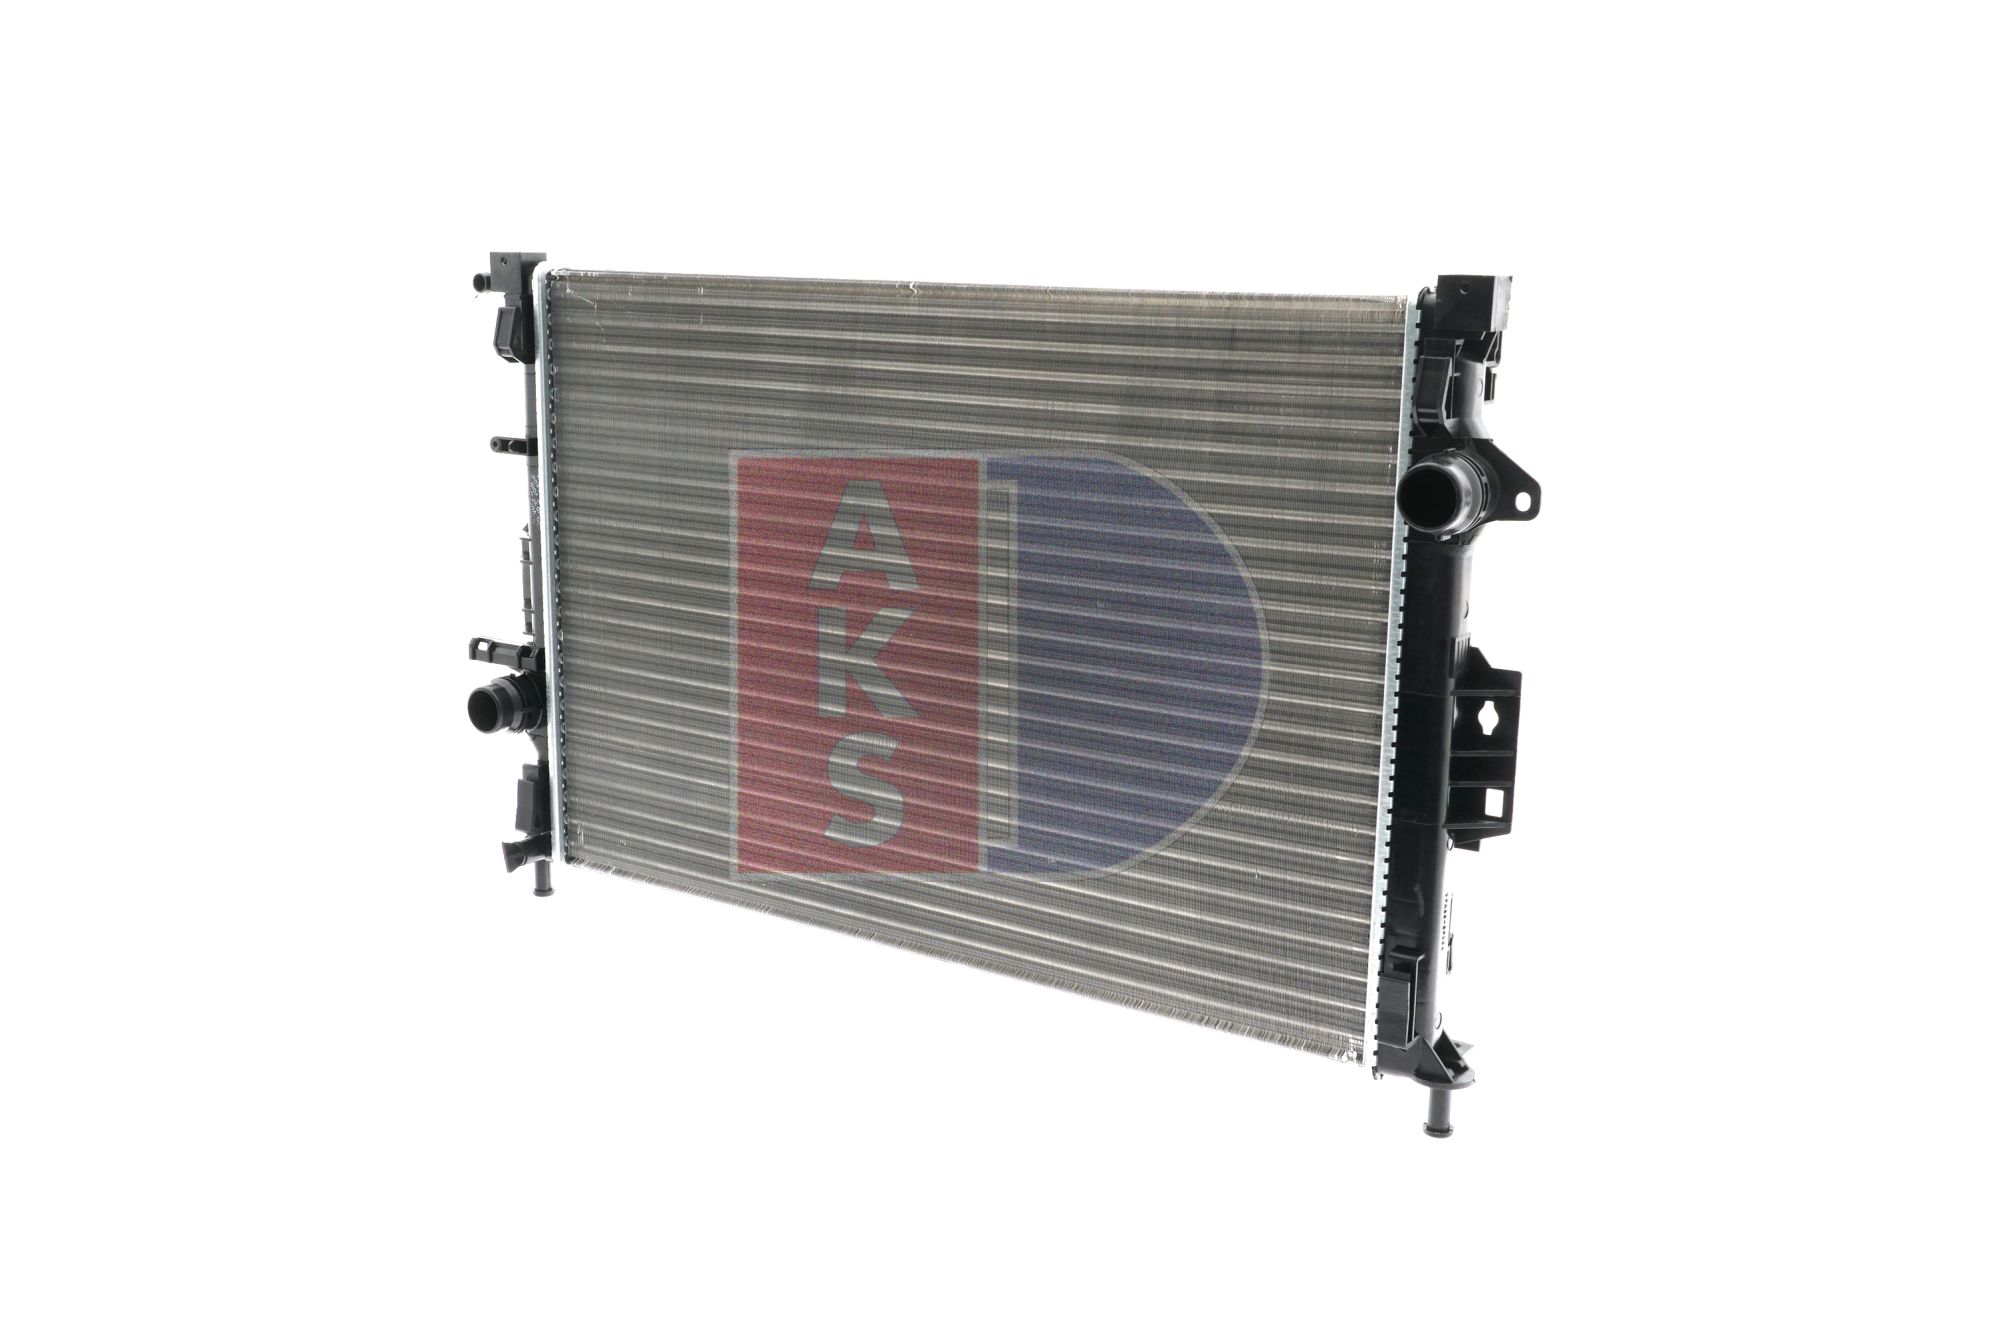 AKS DASIS 092027N Engine radiator 670 x 470 x 18 mm, Mechanically jointed cooling fins